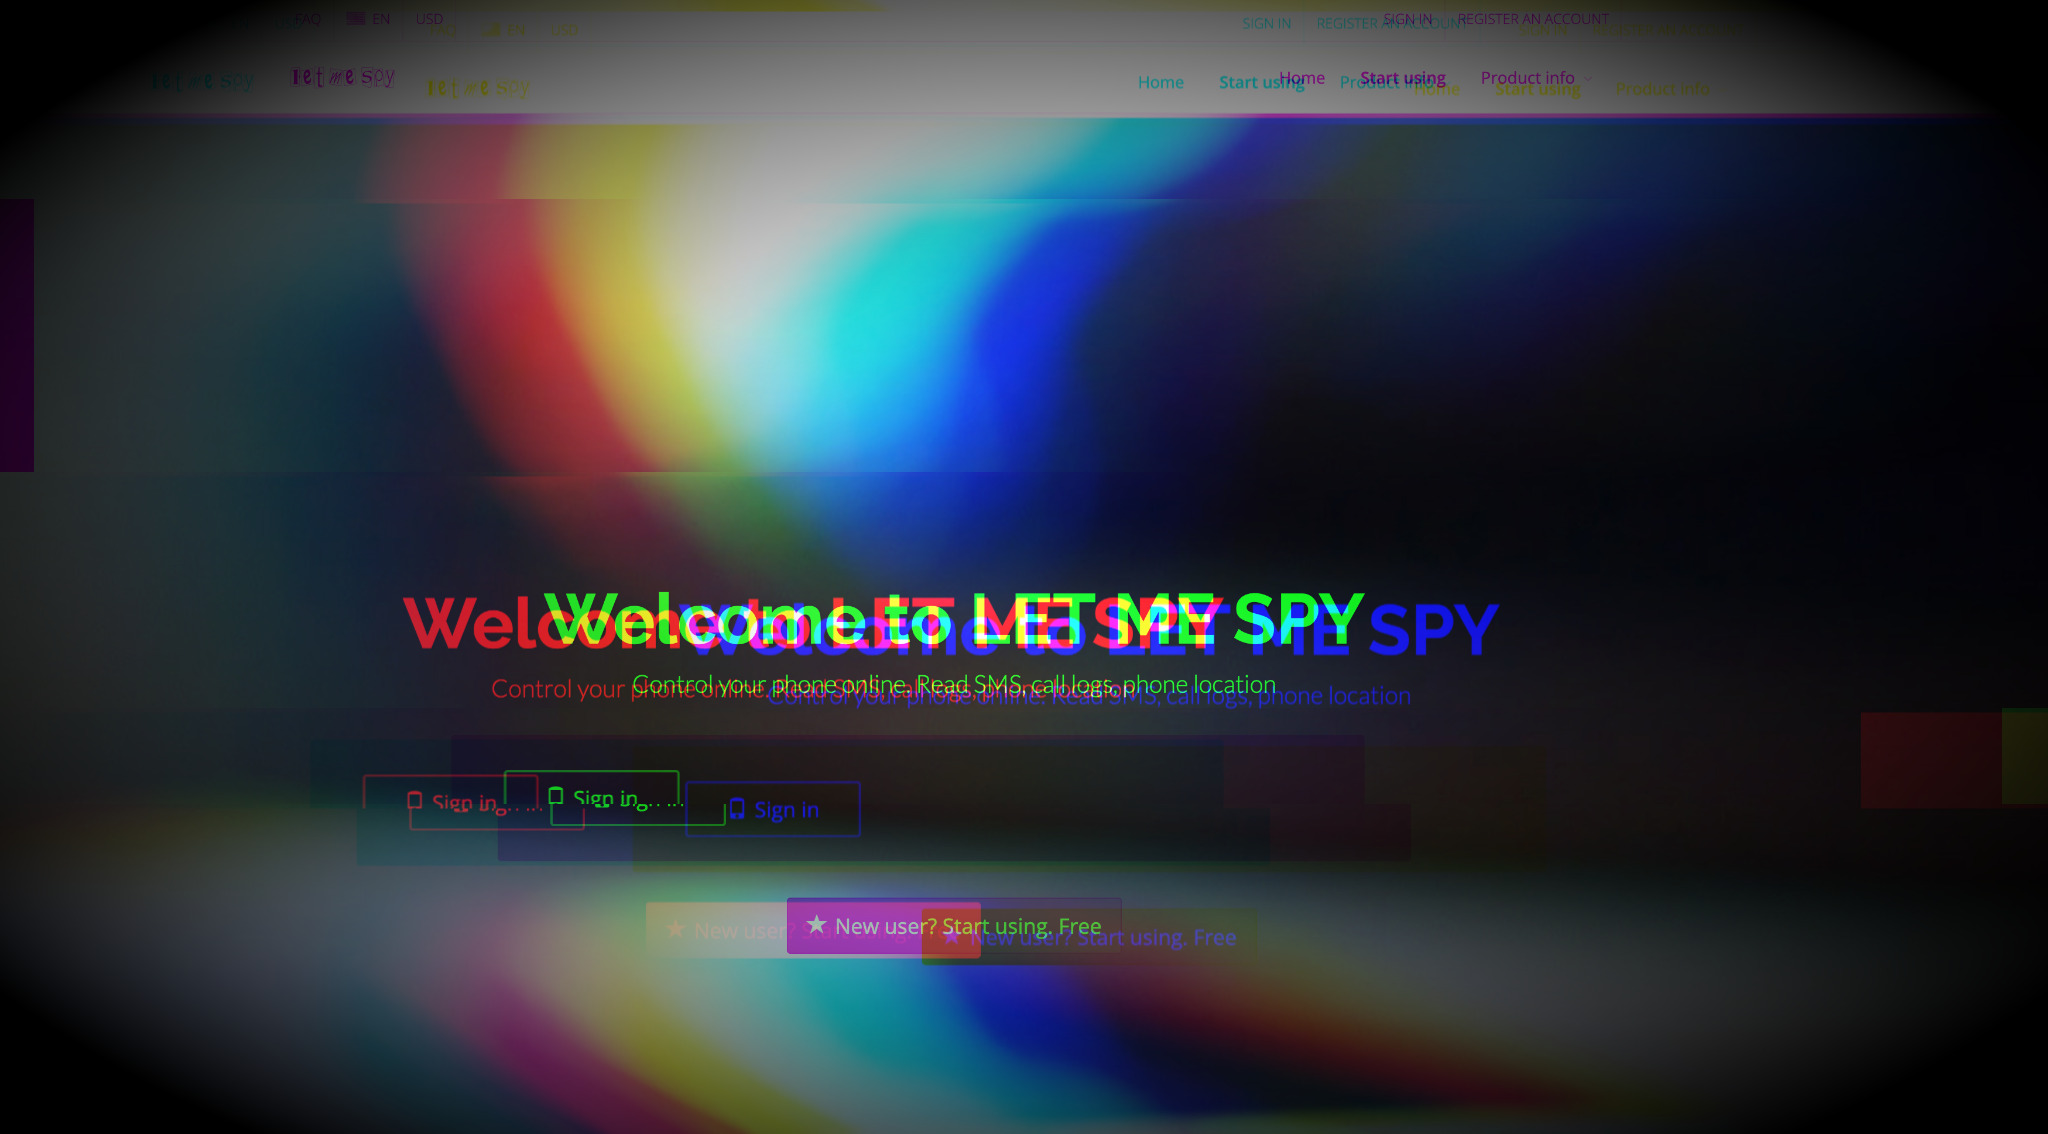 a glitchy edited screenshot of the landing page for LetMeSpy